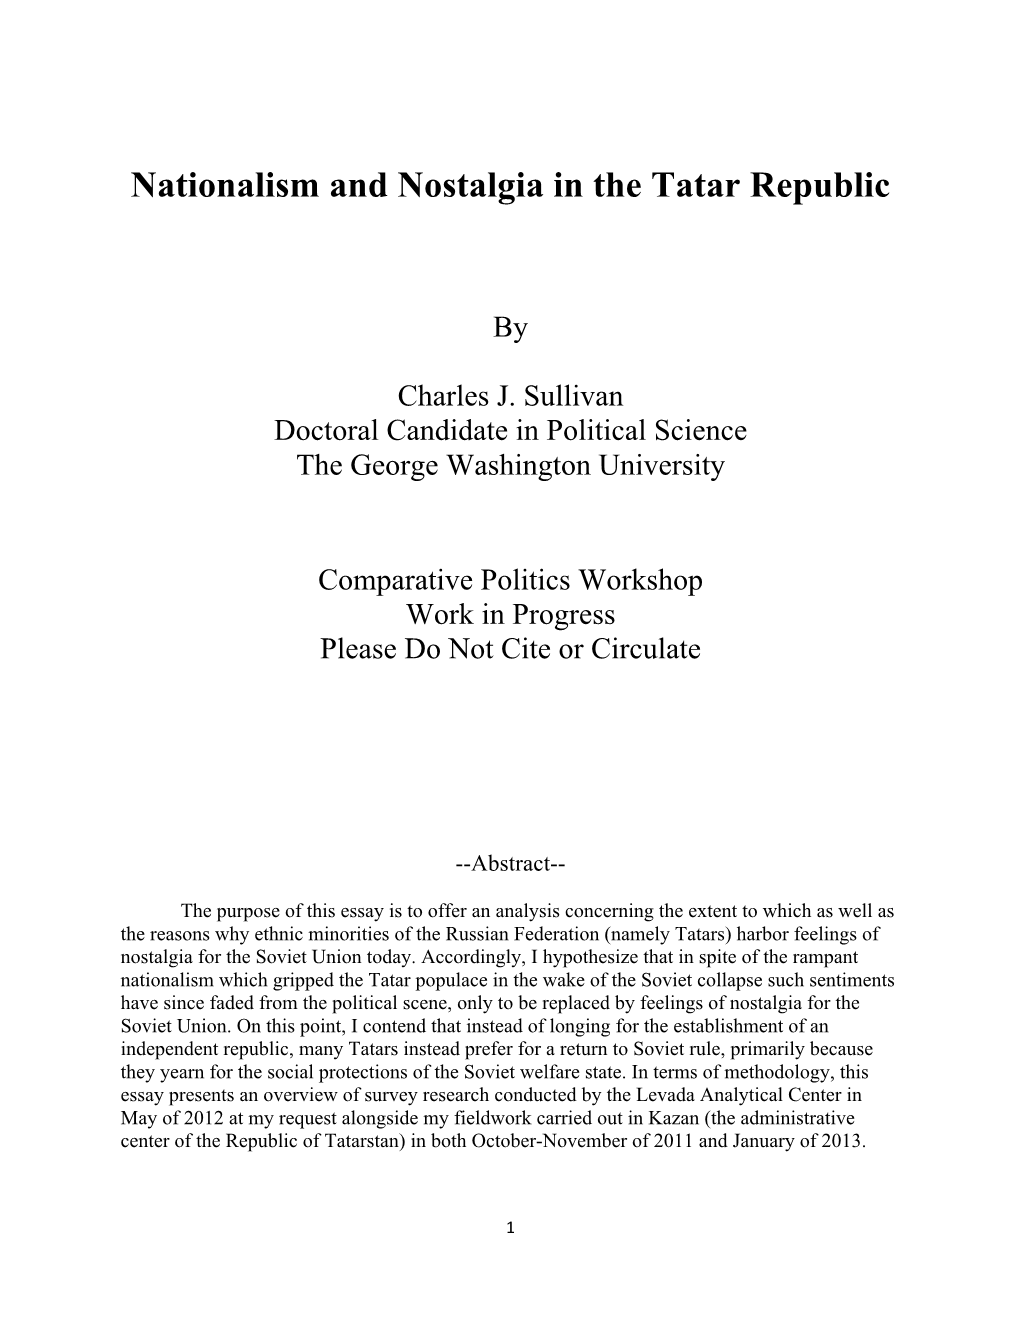 Nationalism and Nostalgia in the Tatar Republic